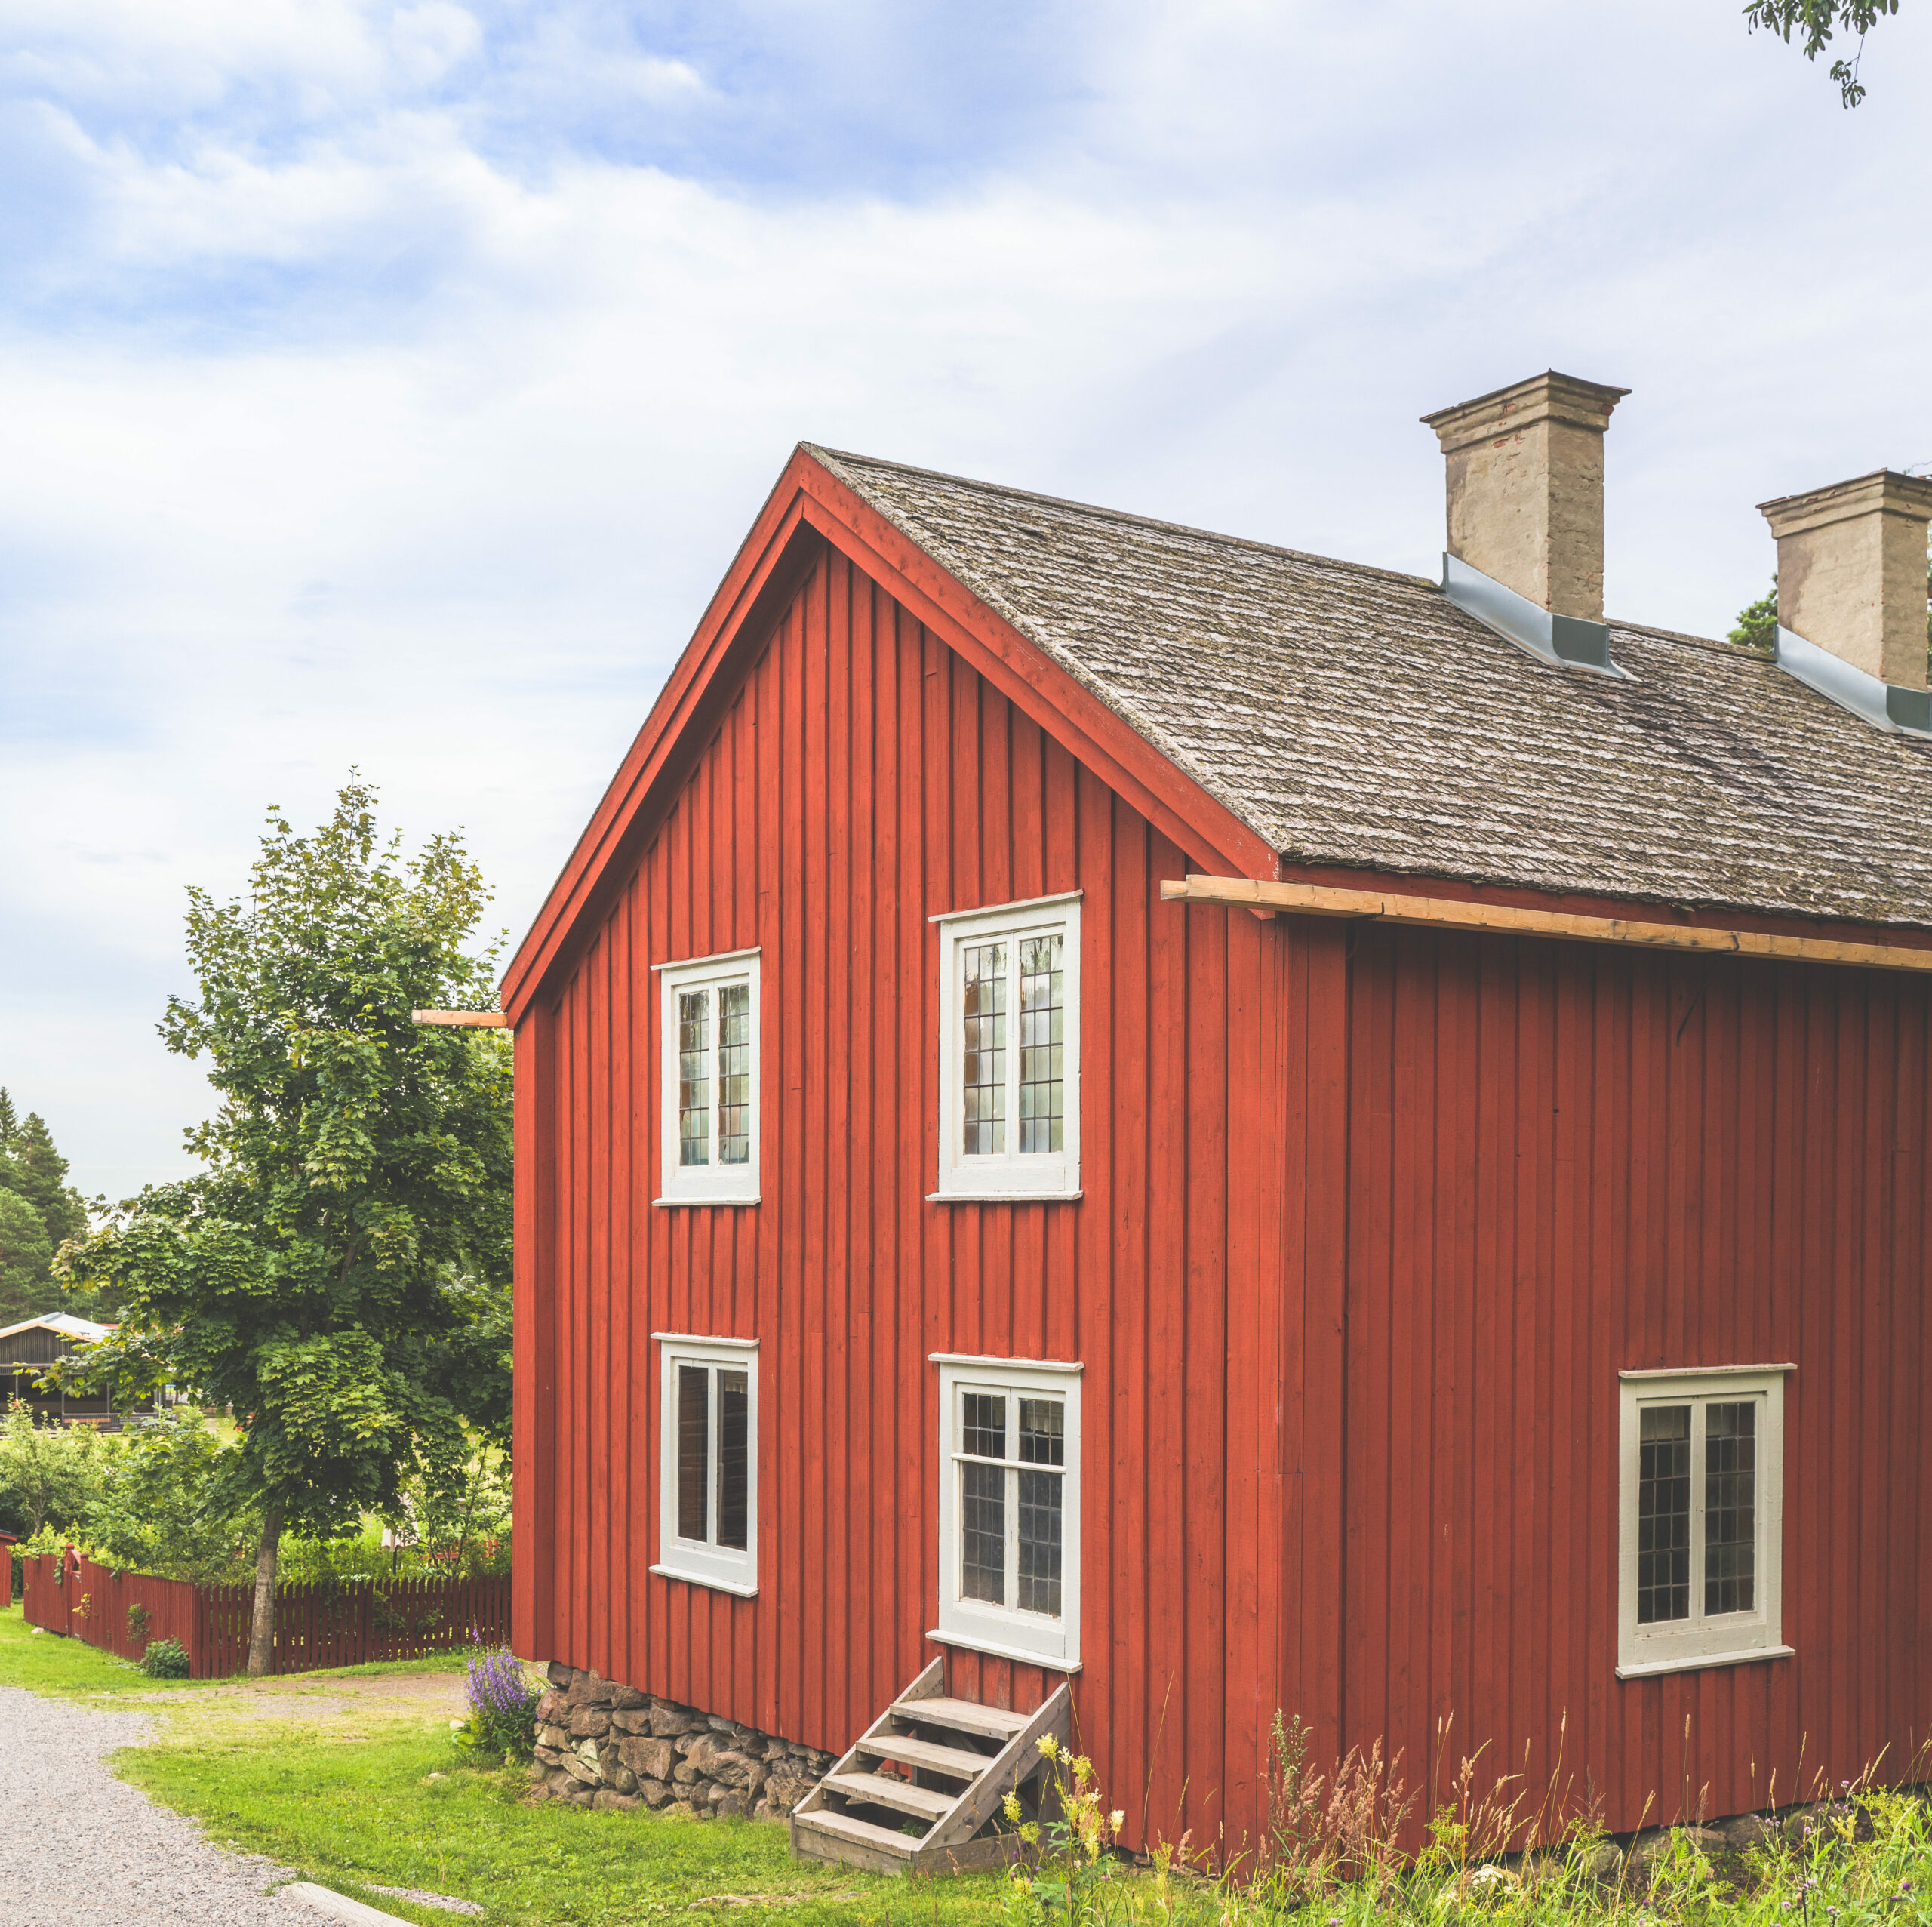 Traditional Swedish house in Norra Berget